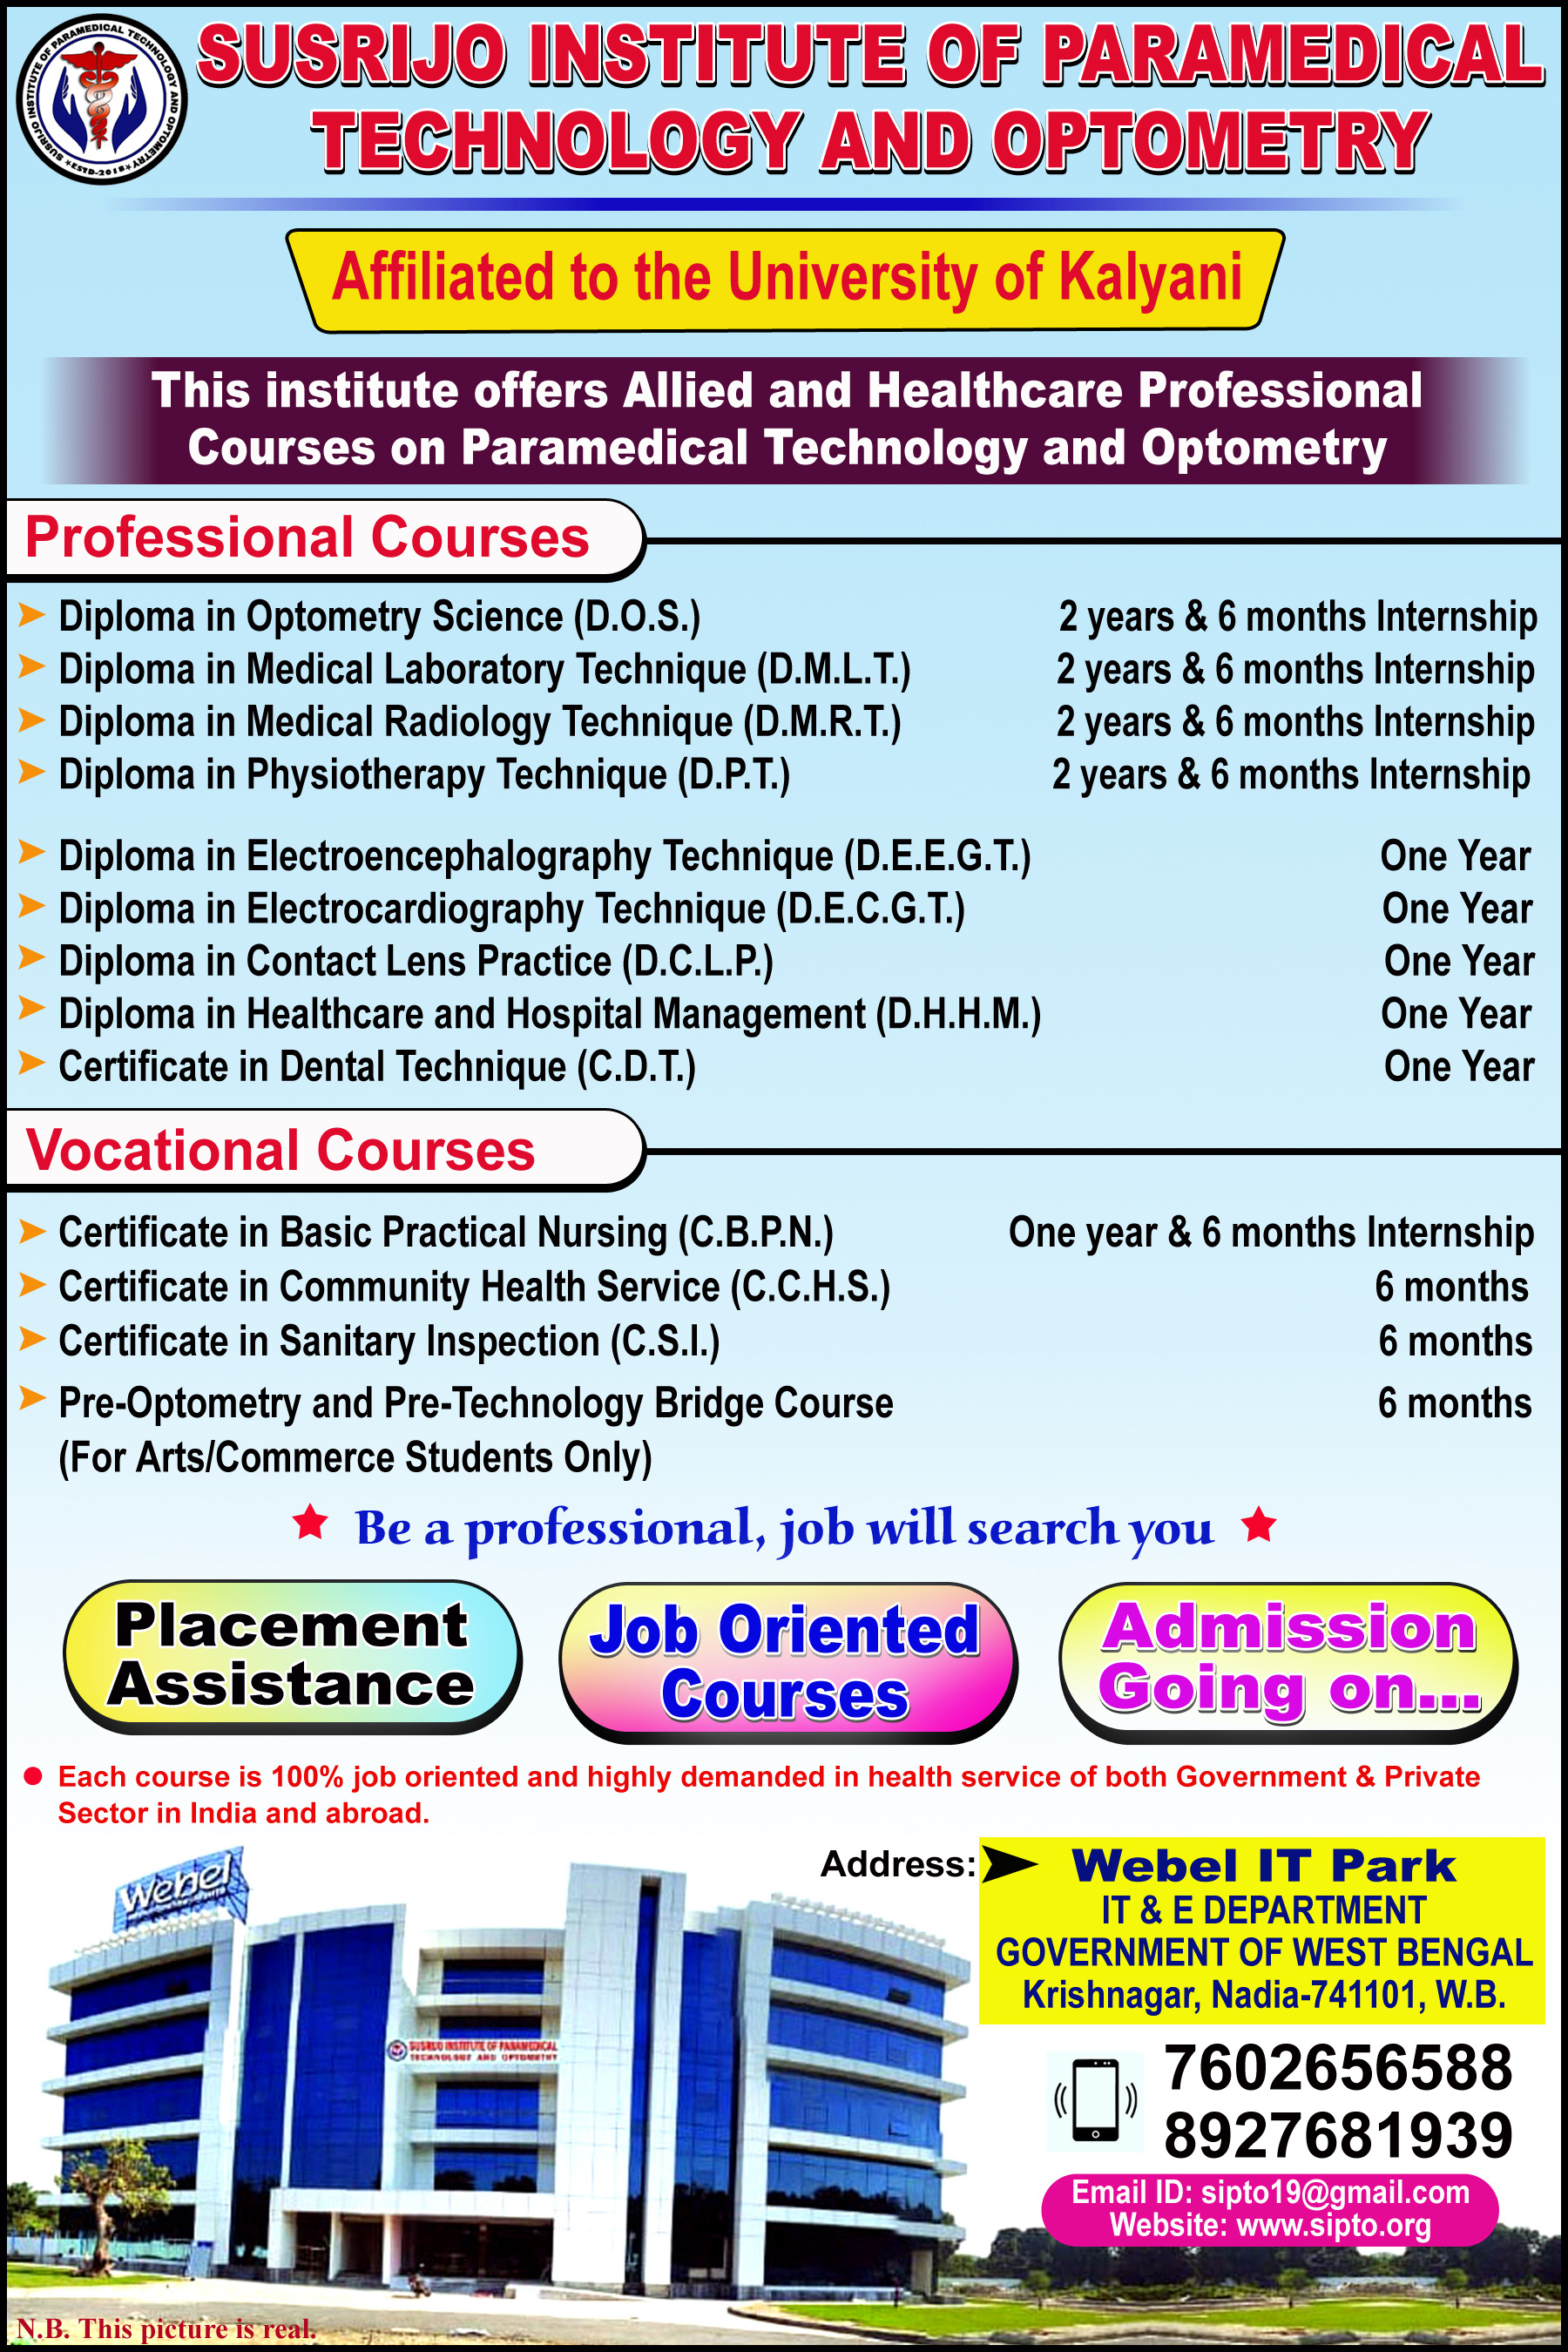 In physiotherapy diploma Diploma in